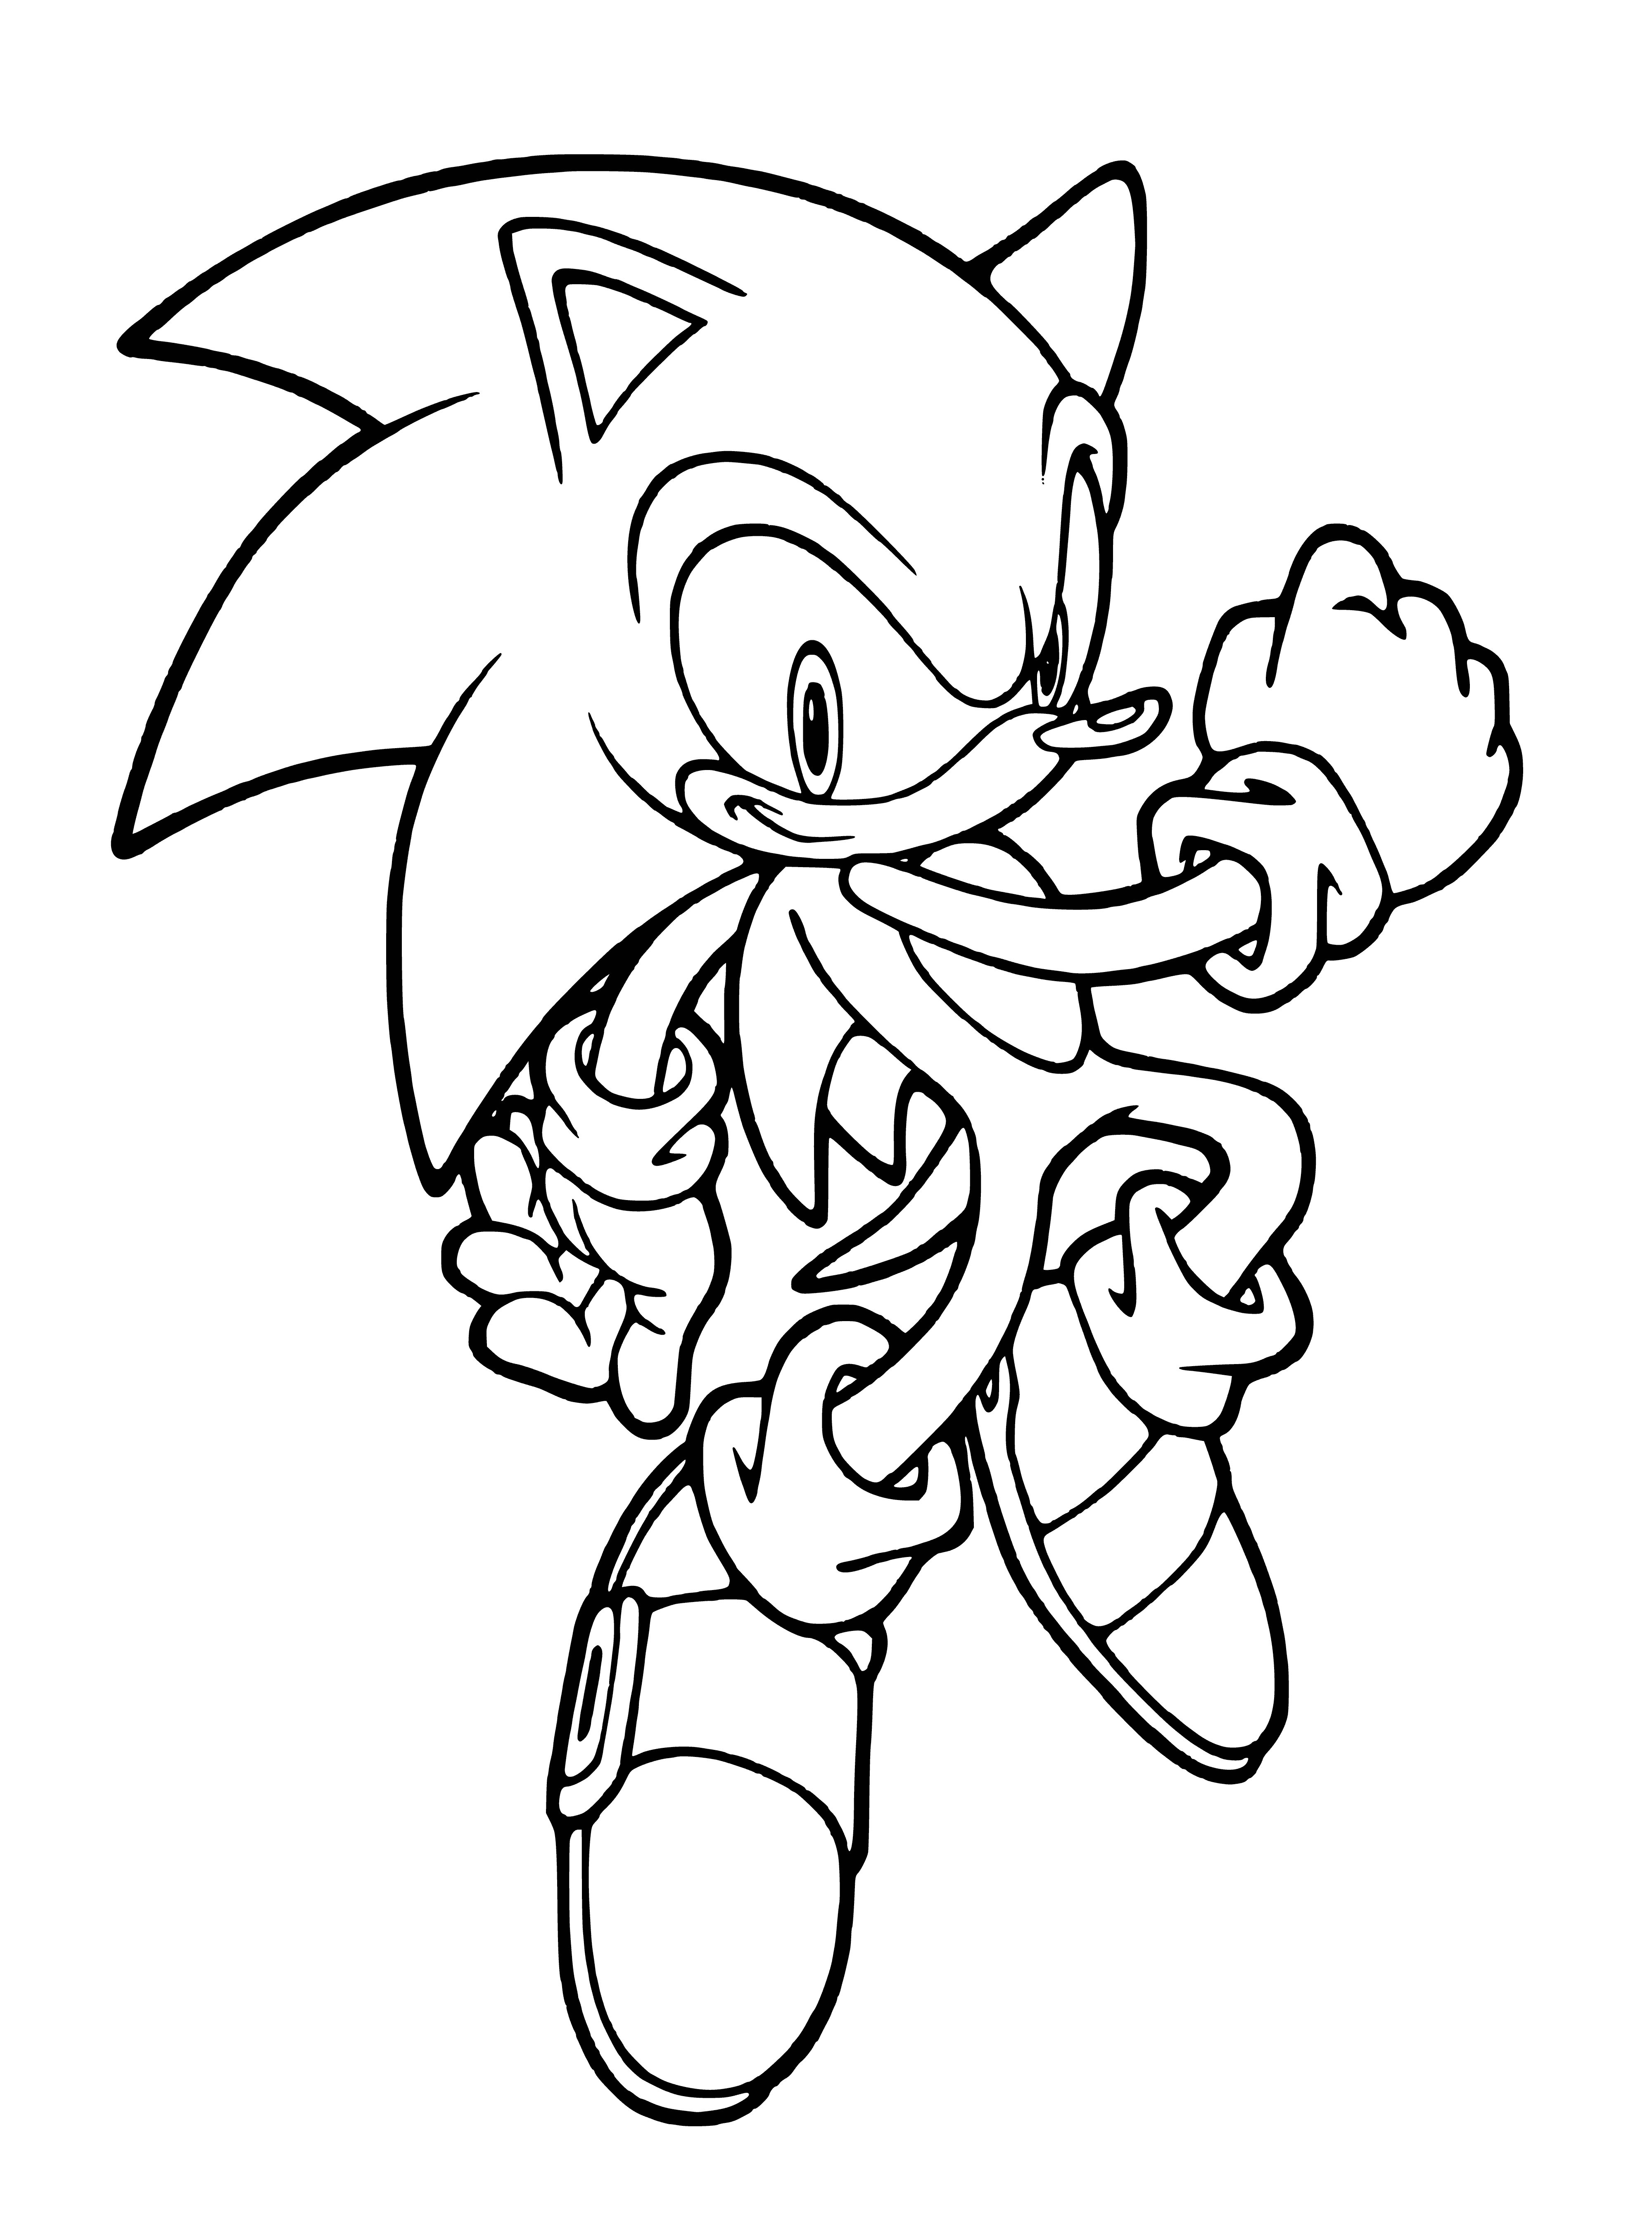 coloring page: An adorable blue hedgehog is running fast, with spines, big eyes, and red sneakers w/ white stripes. A yellow ring trails him.